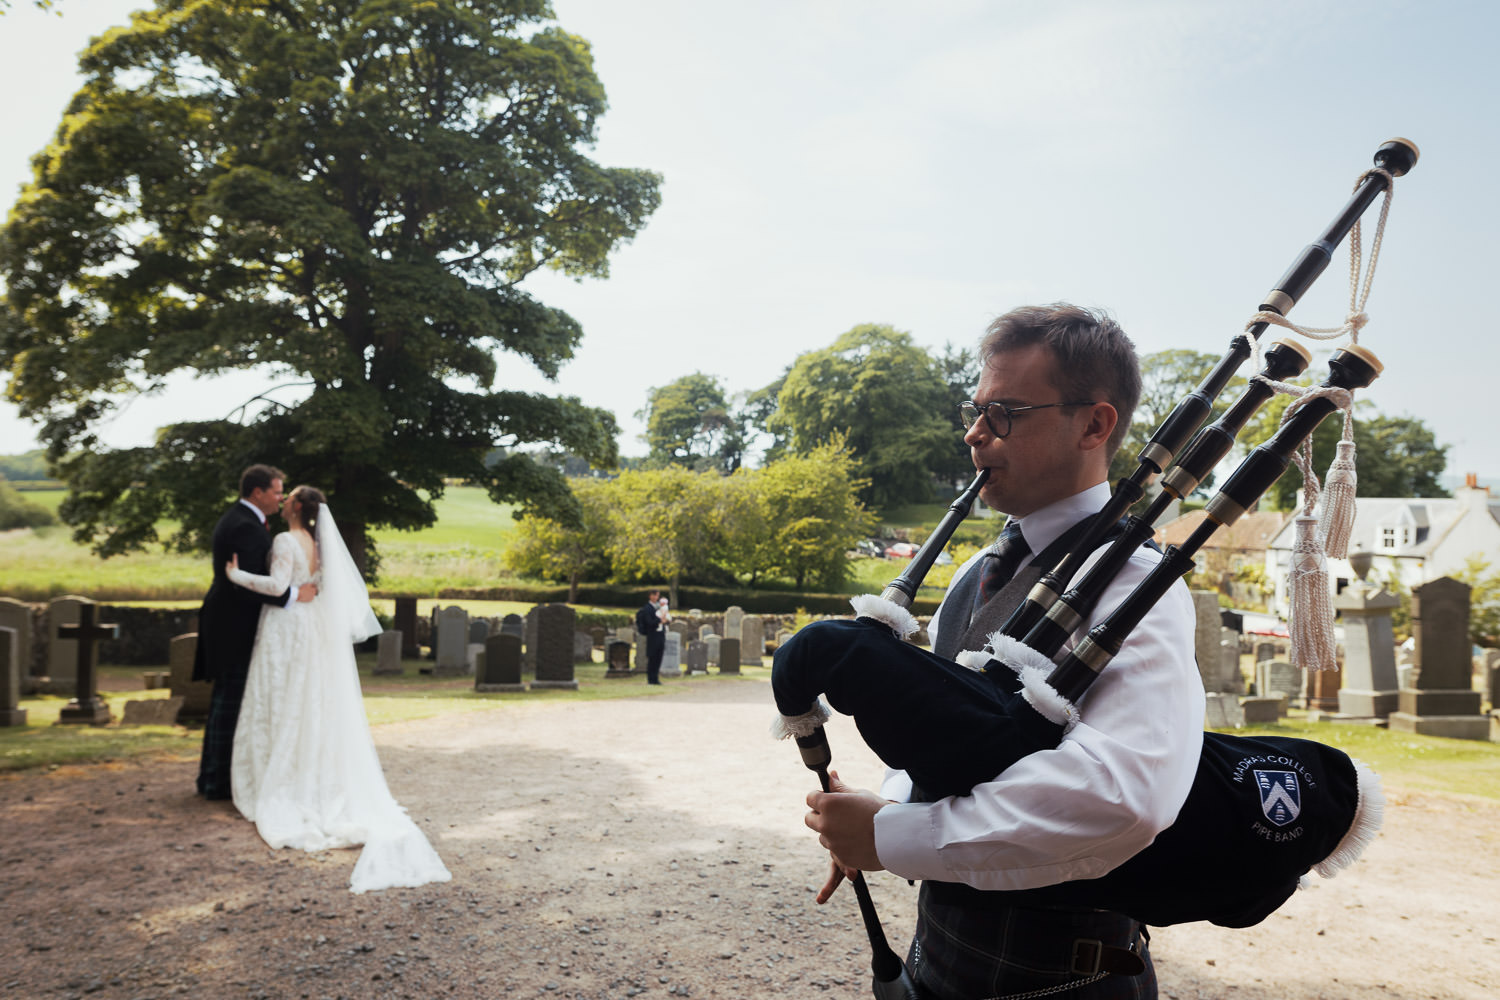 Bride and groom kissing in the background while a man plays the bagpipes.